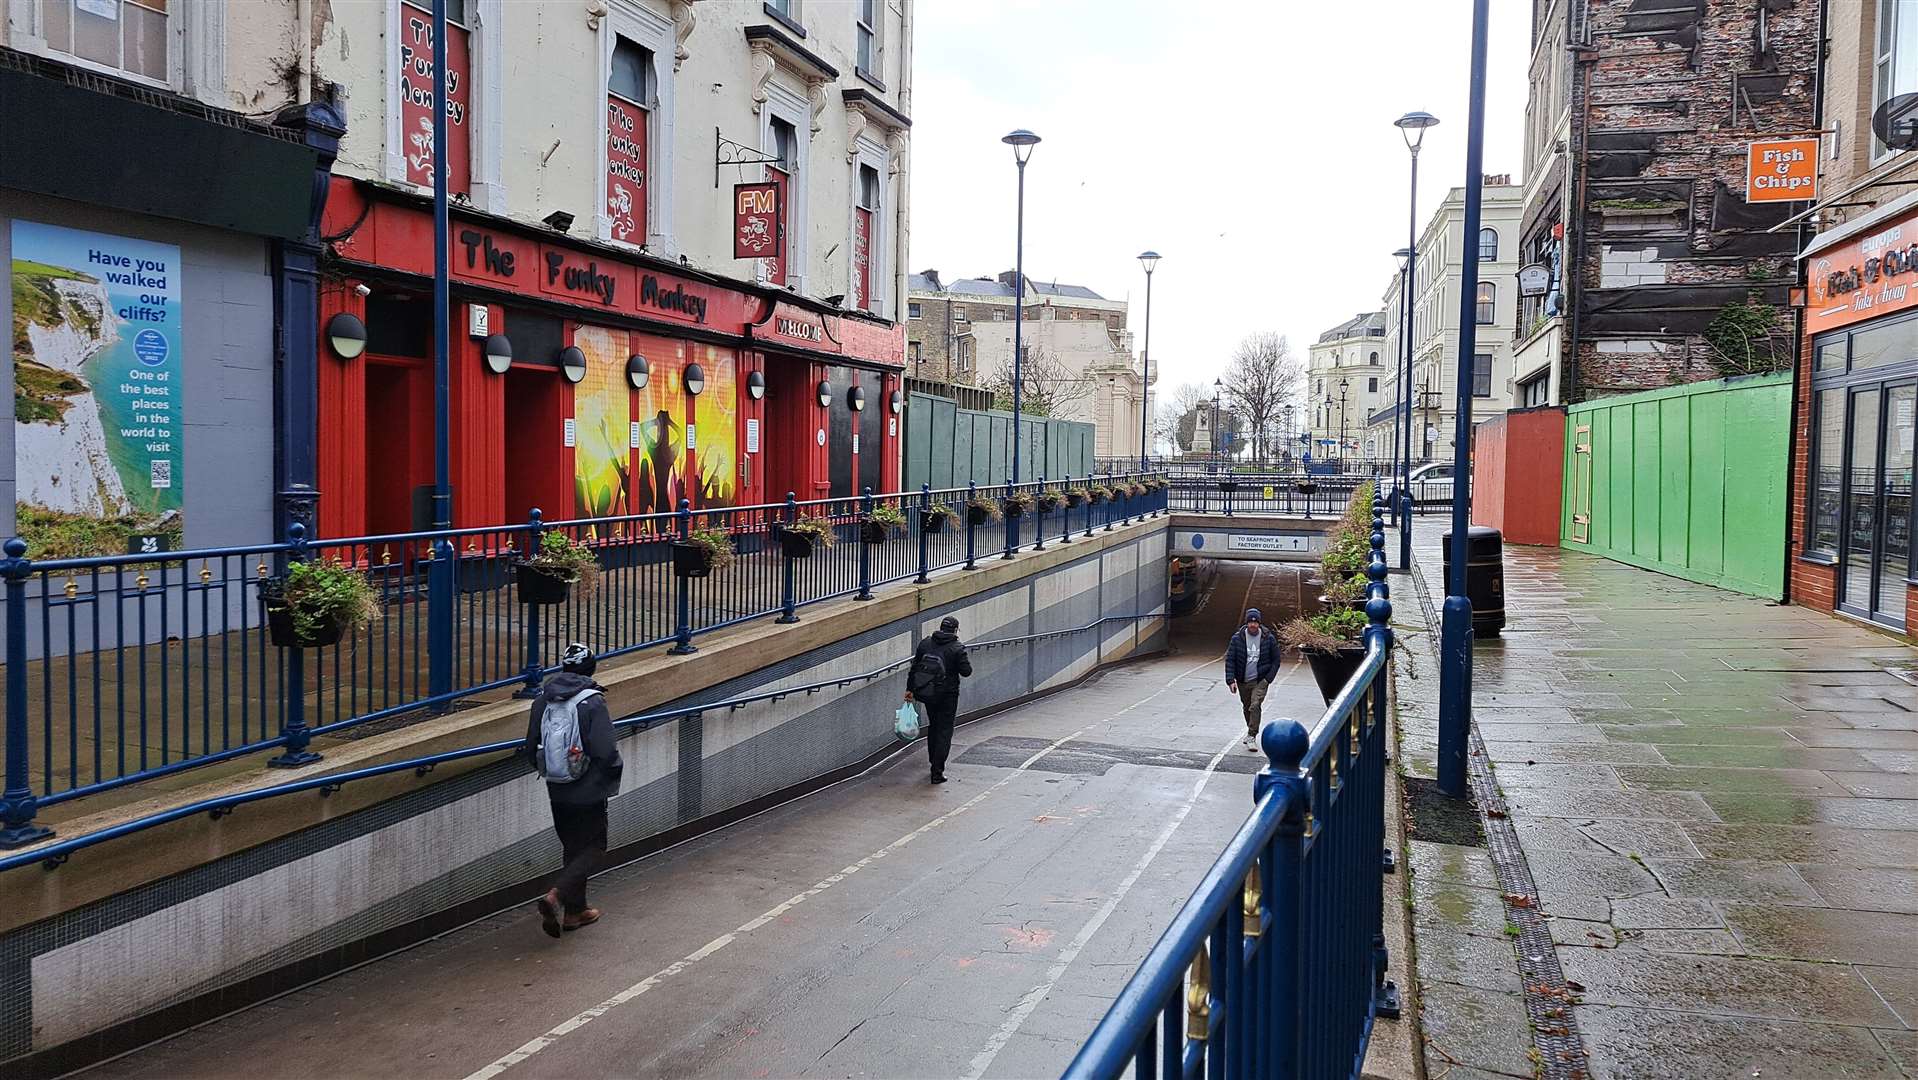 The subway at Bench Street, which leads walkers from the town to the seafront